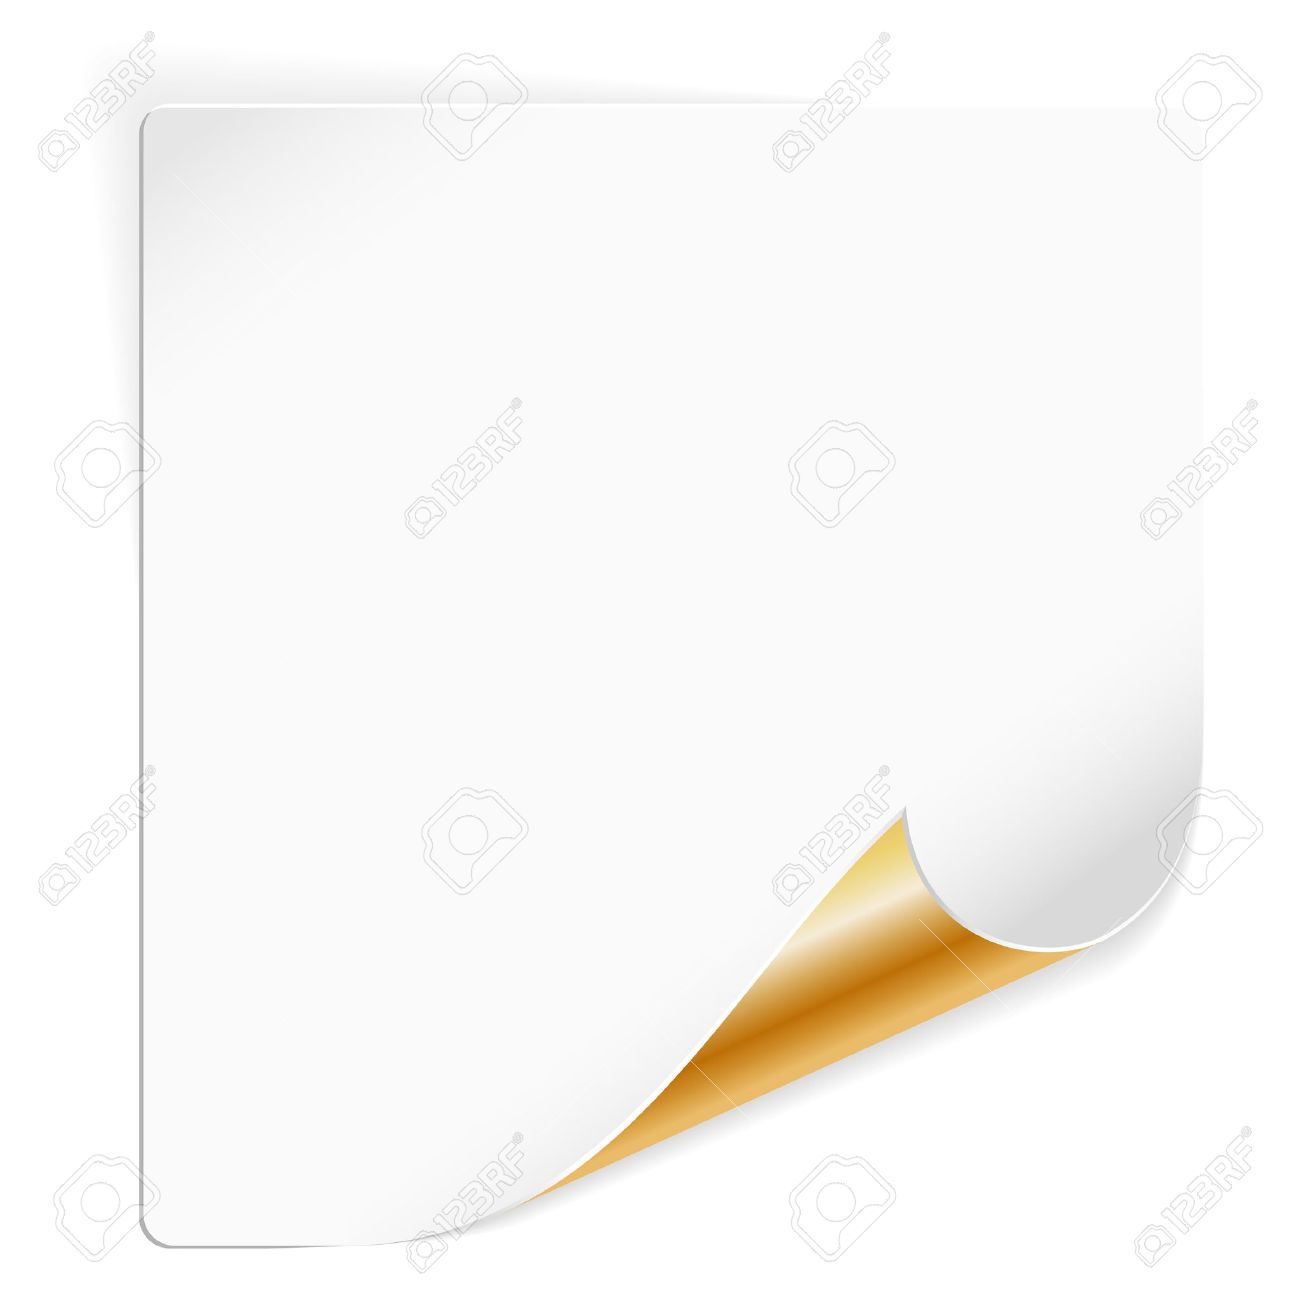 15089770-sheet-of-white-paper-with-curved-gold-corner-page.jpg